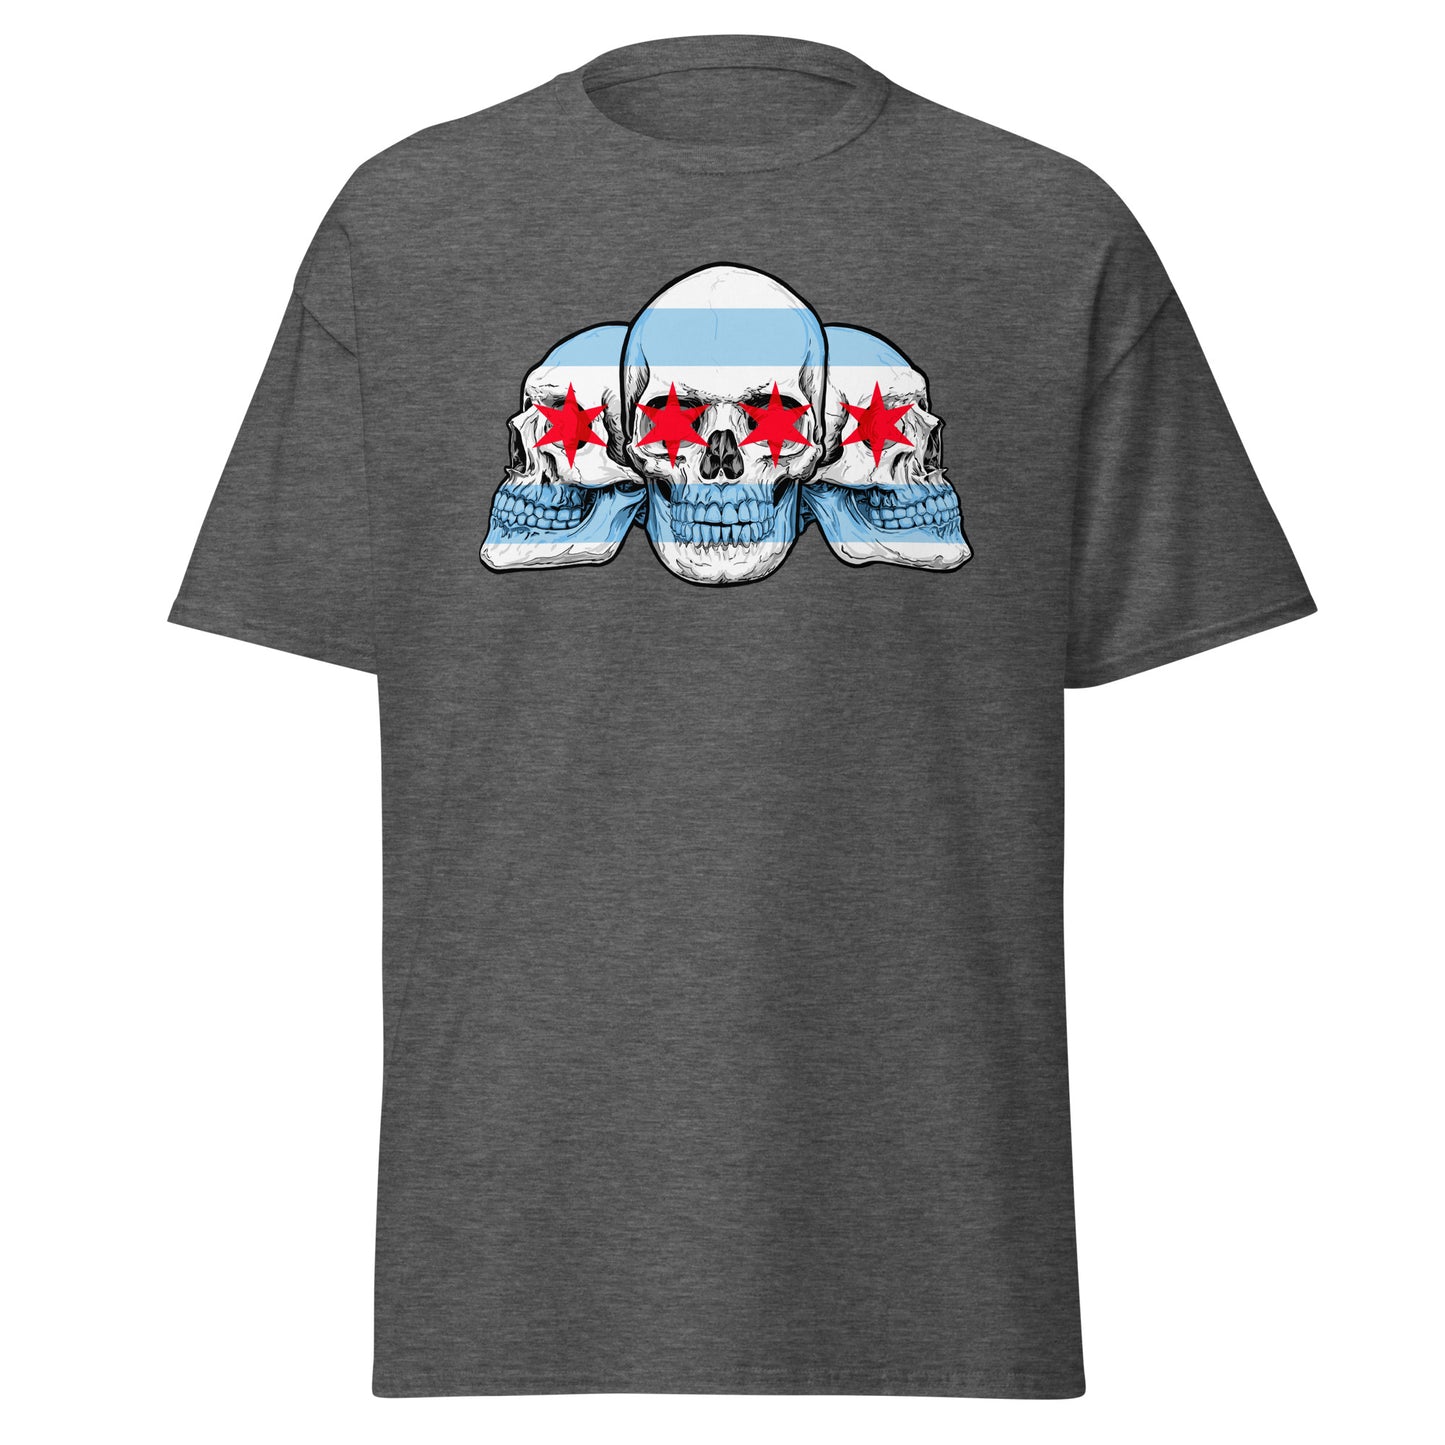 Chicago City Flag with Skulls T-Shirt